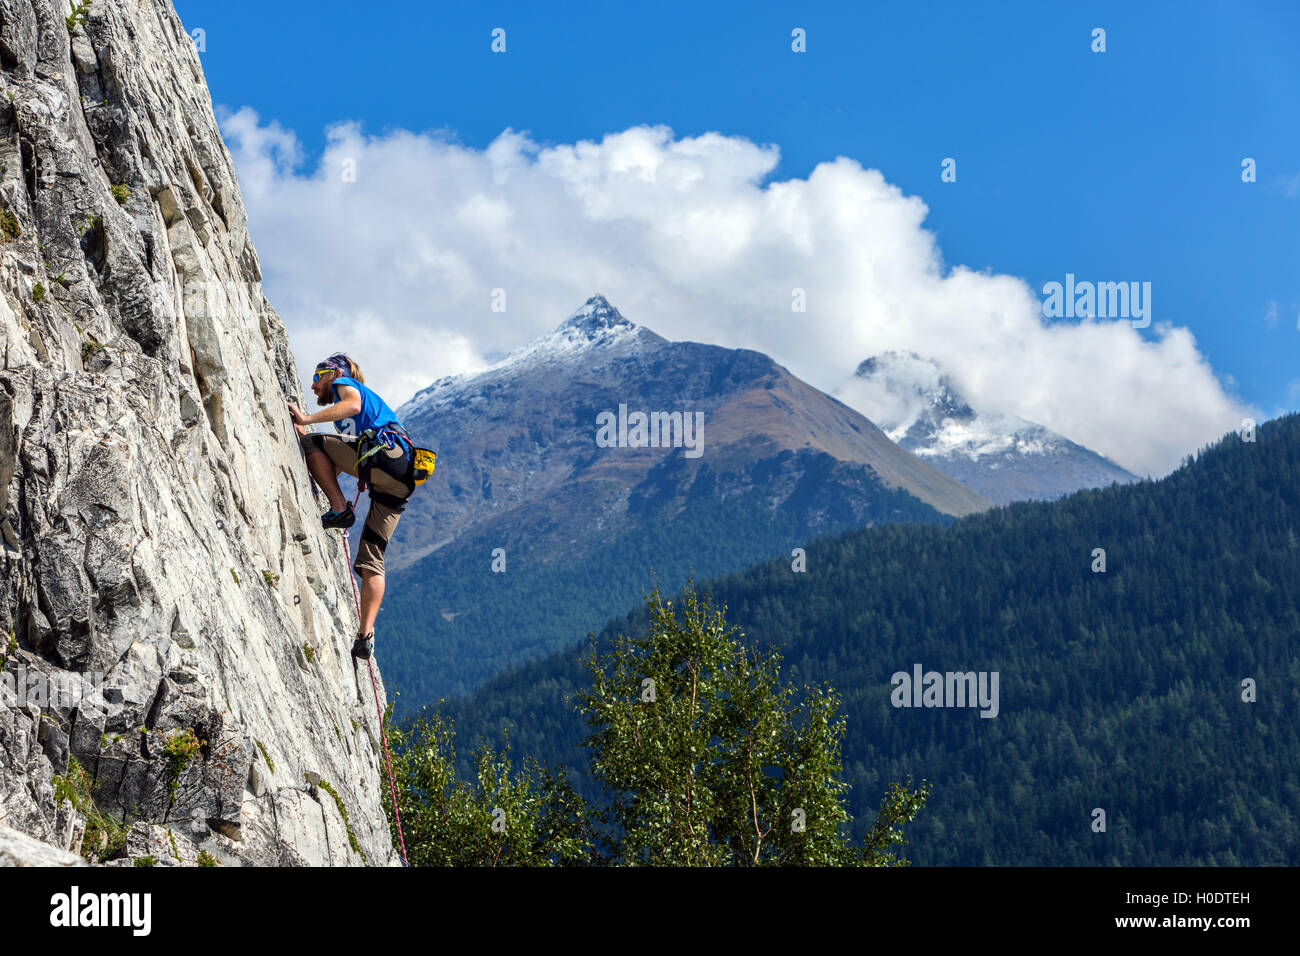 Slim male rock climber in blue on steep rock face, with blue sky mountains and clouds Stock Photo